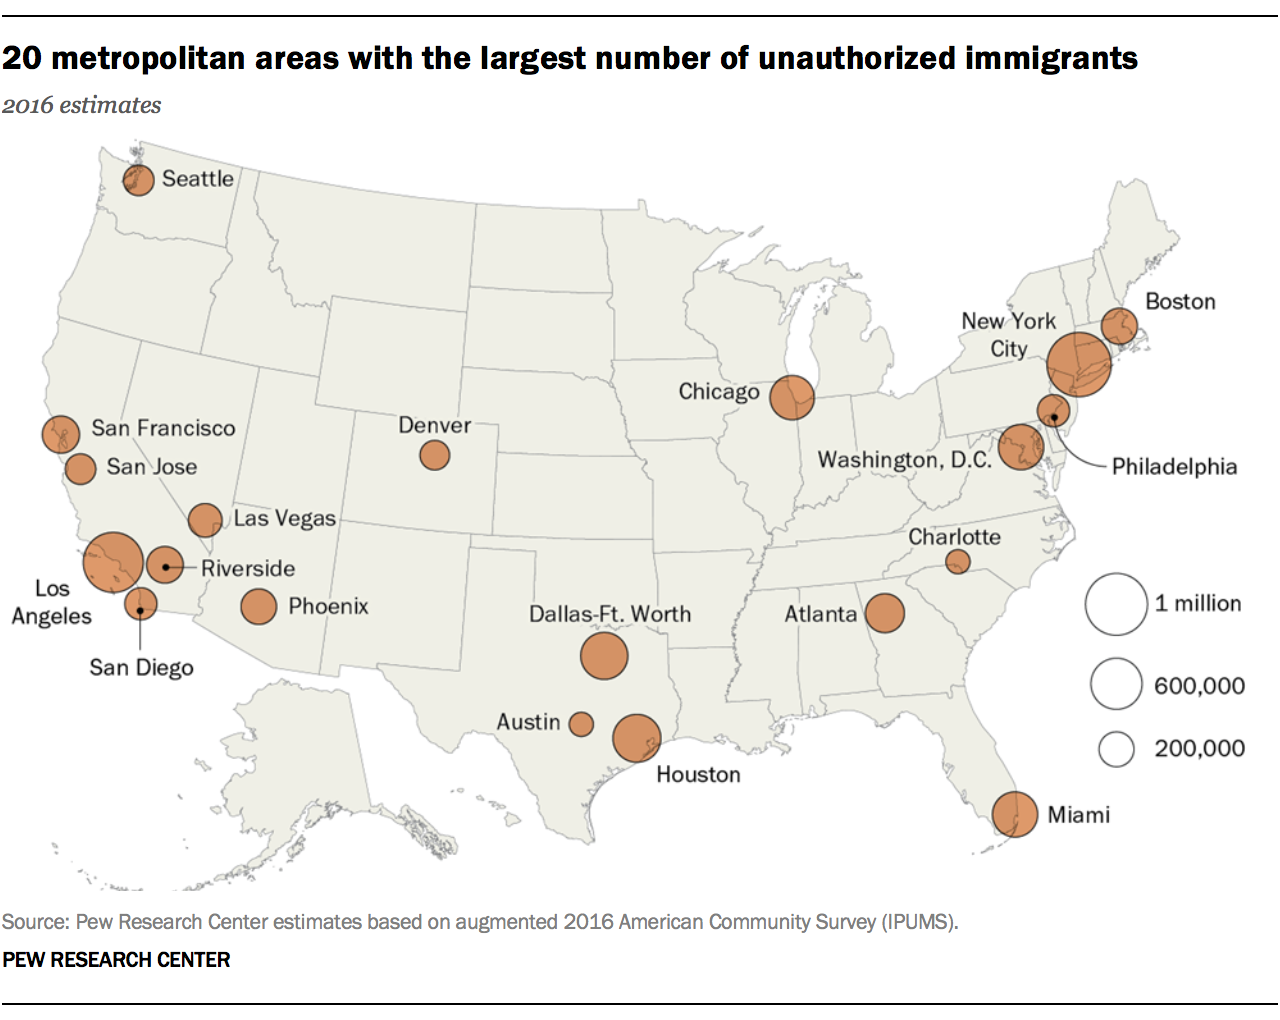 20 metropolitan areas with the largest number of unauthorized immigrants